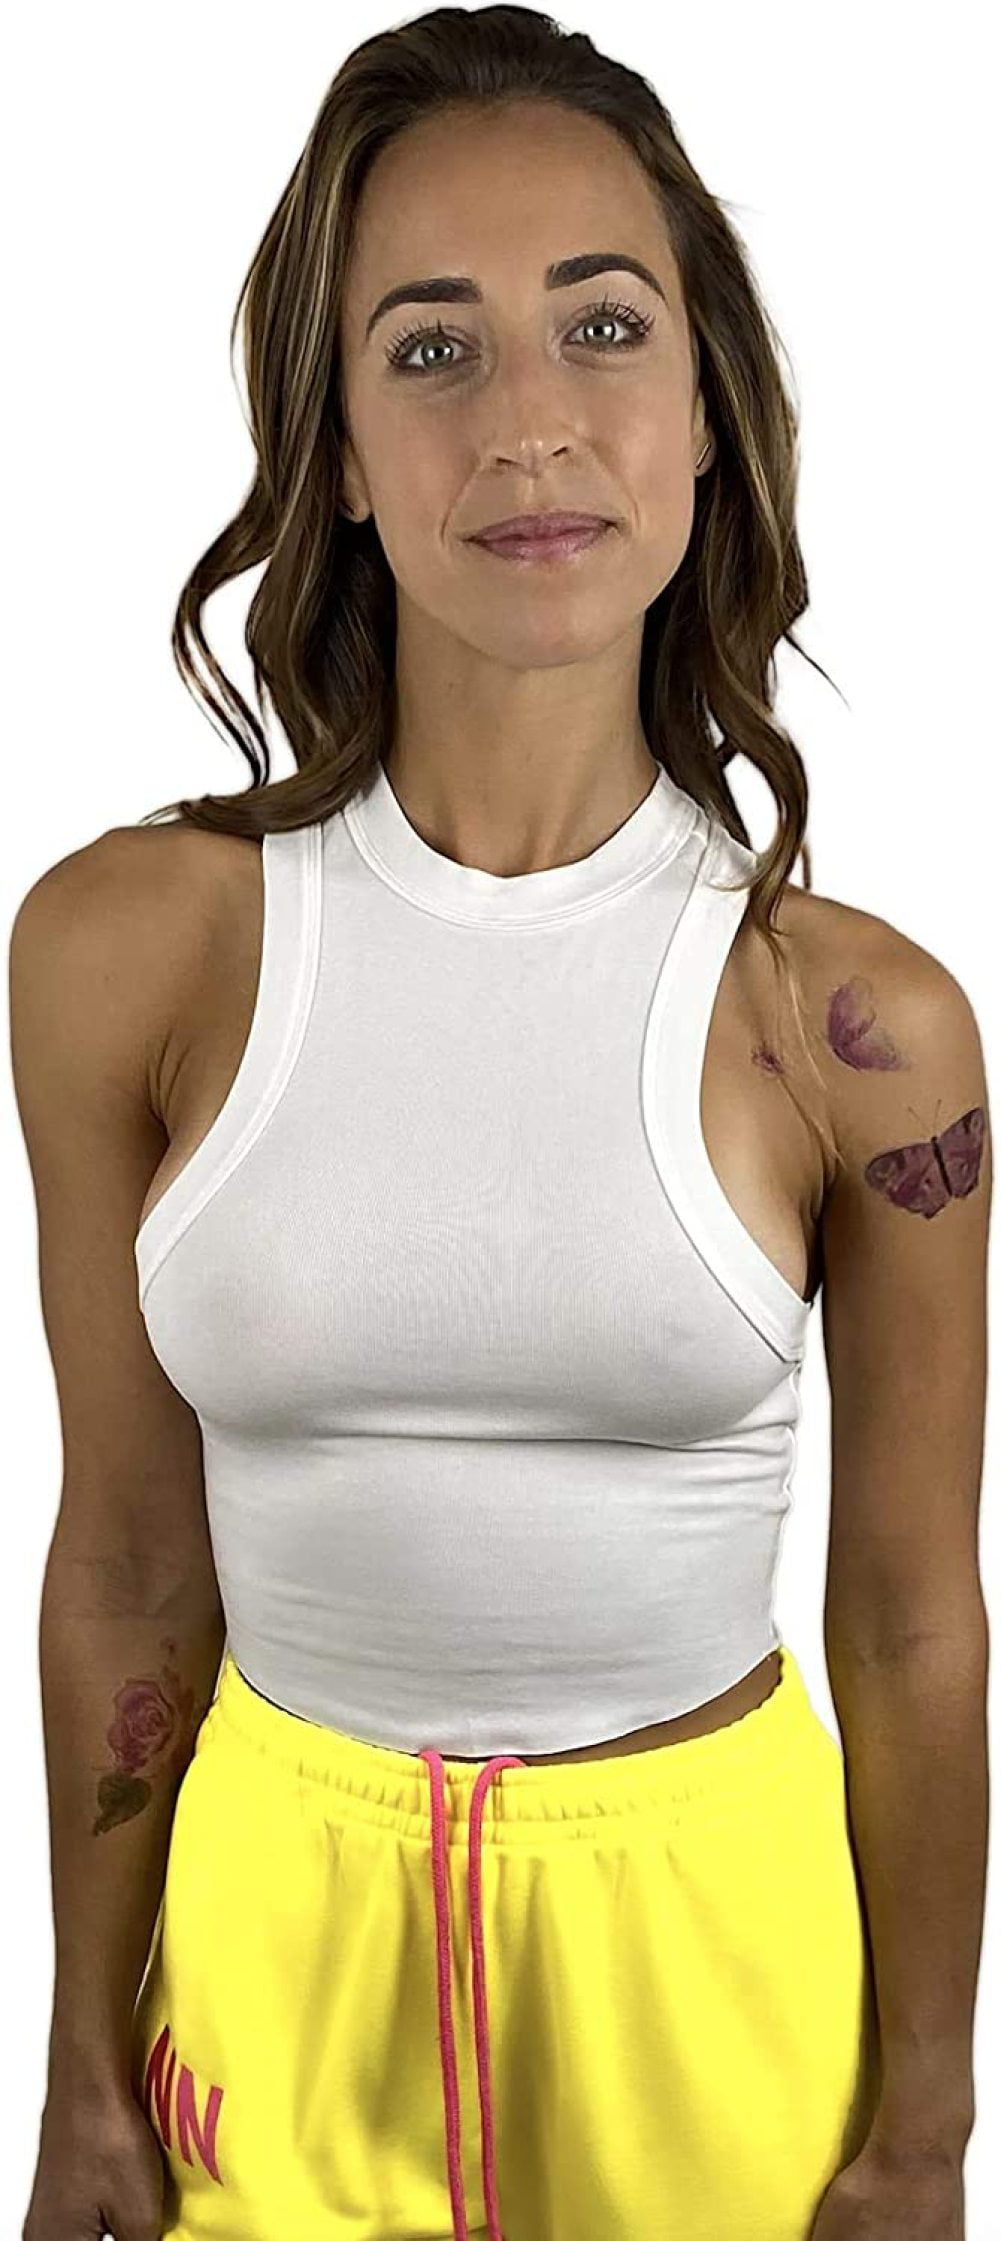 BalyFovin Sexy Side Boob White Tank Crop Top for Party Dates Festival Raves  